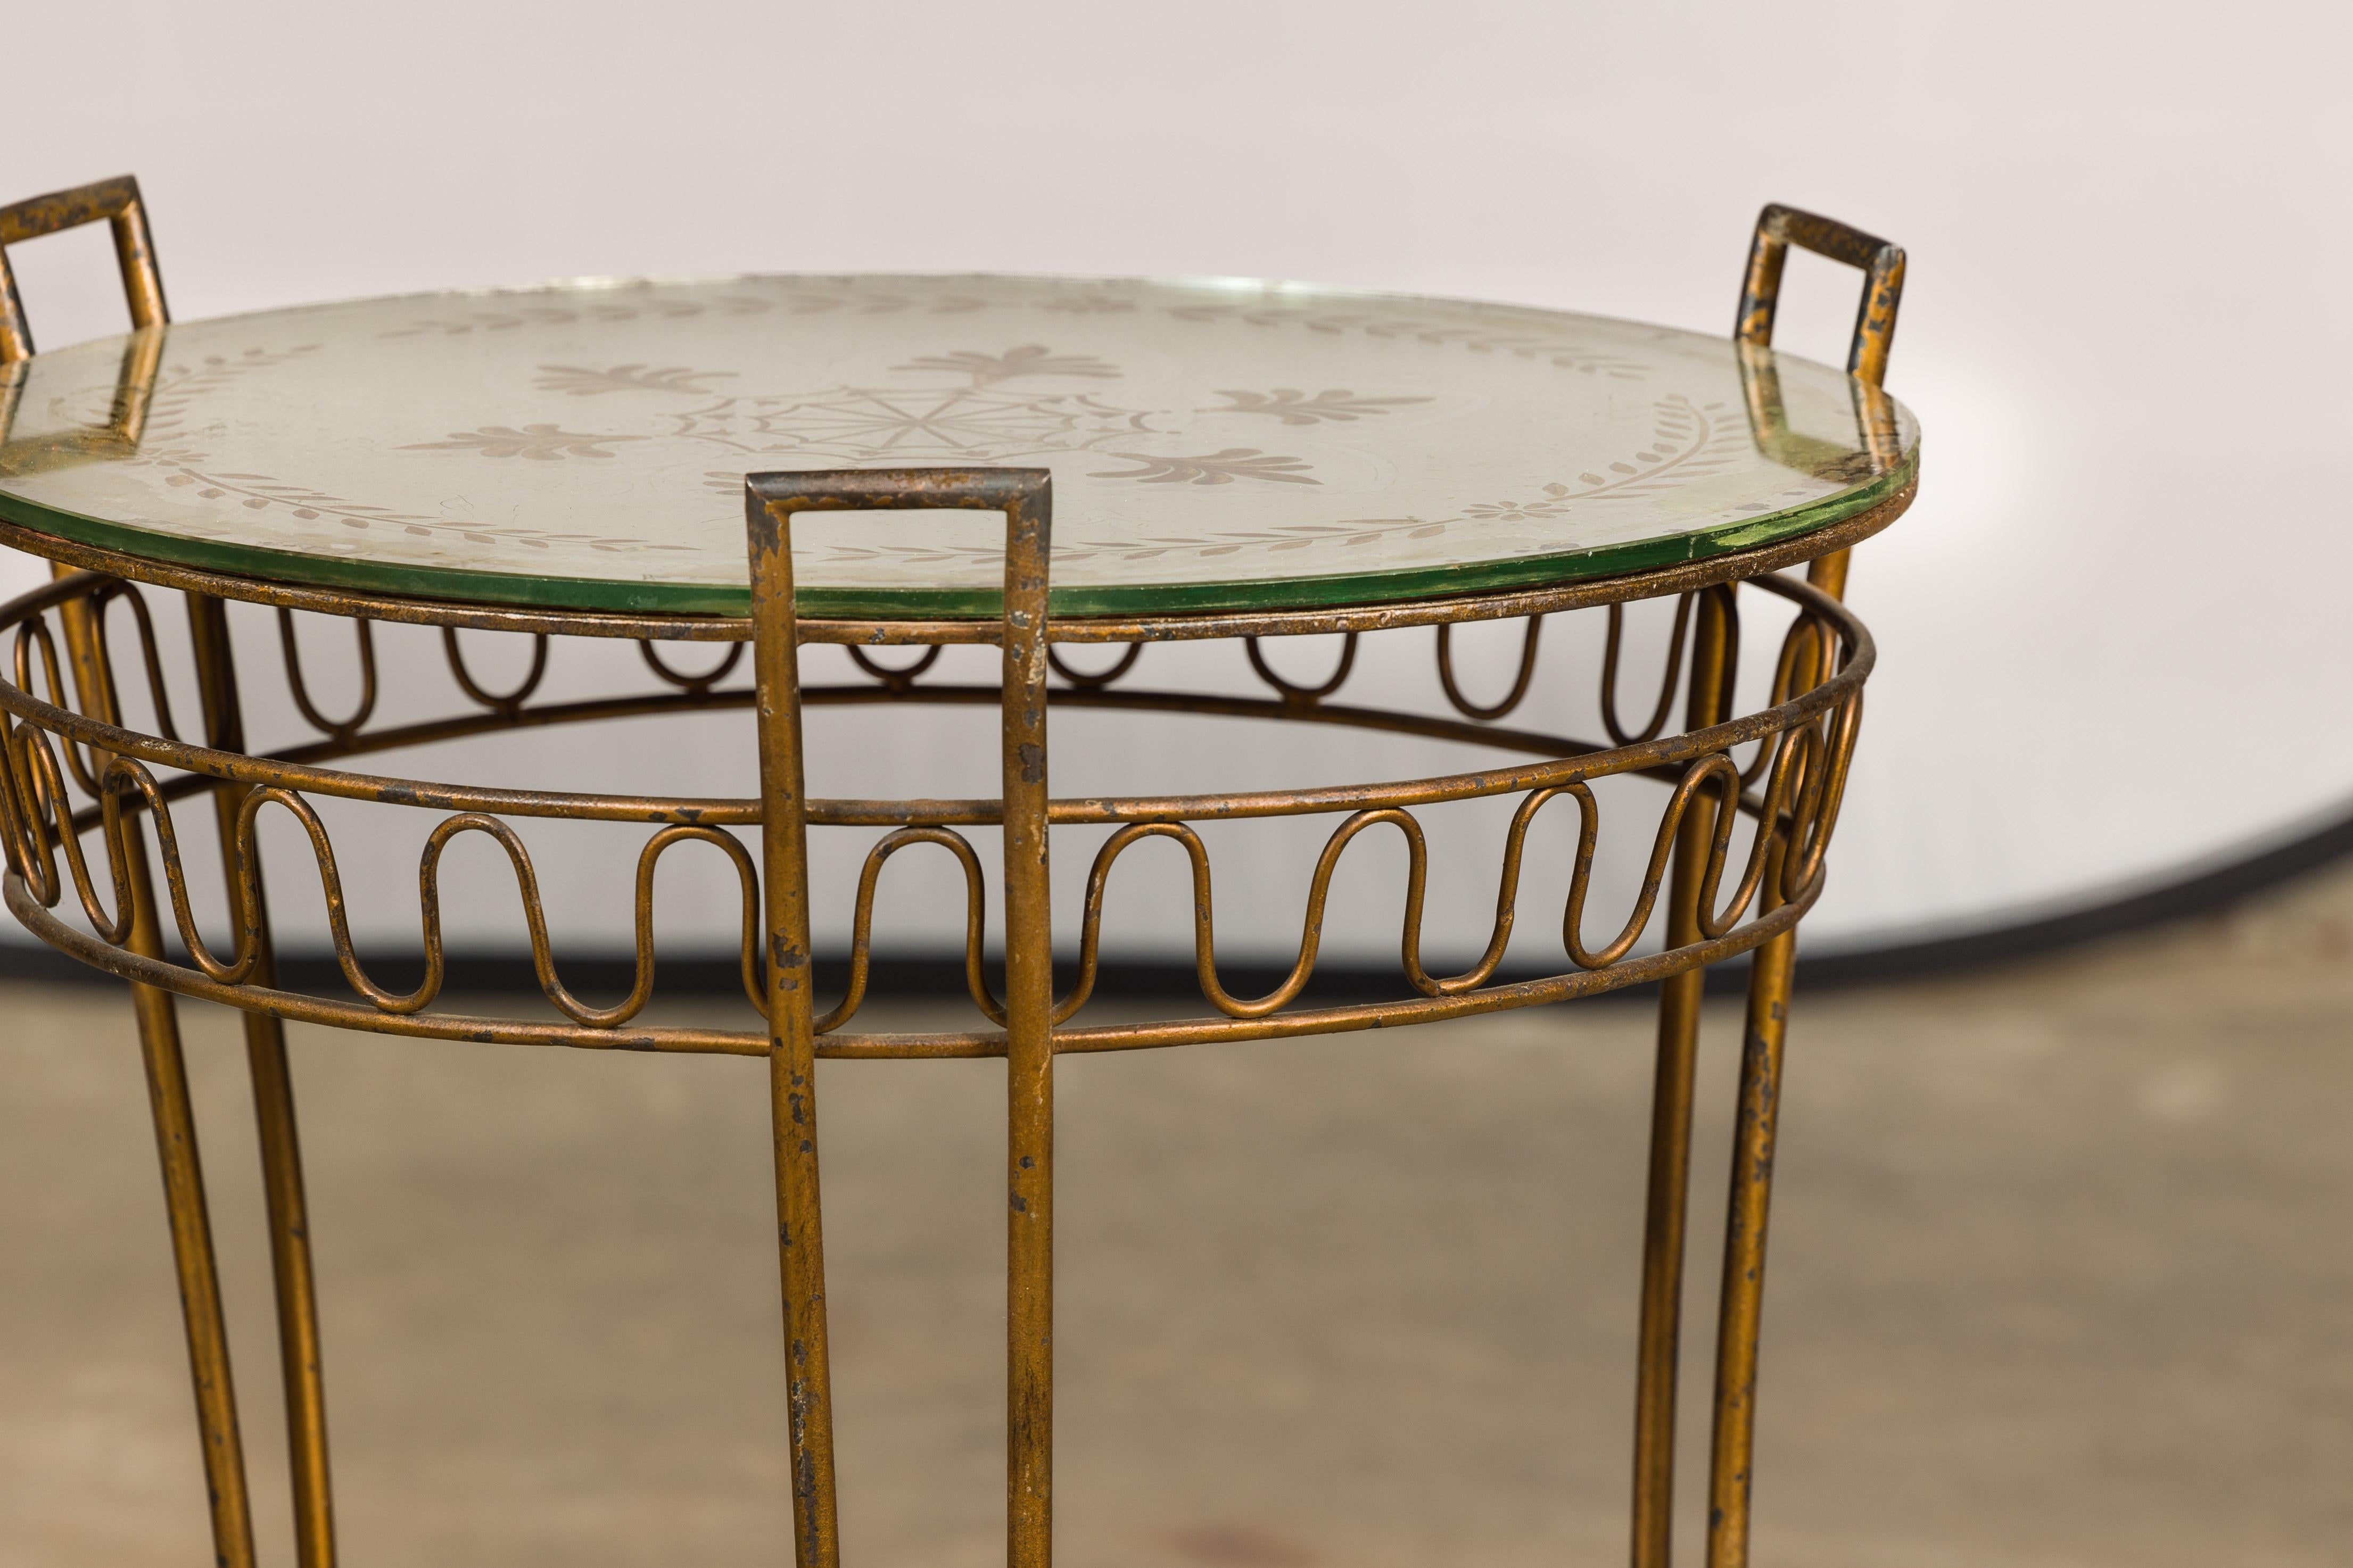 French 1920s Gilt Iron Side Table with Etched Foliage Mirrored Top and Low Shelf For Sale 6